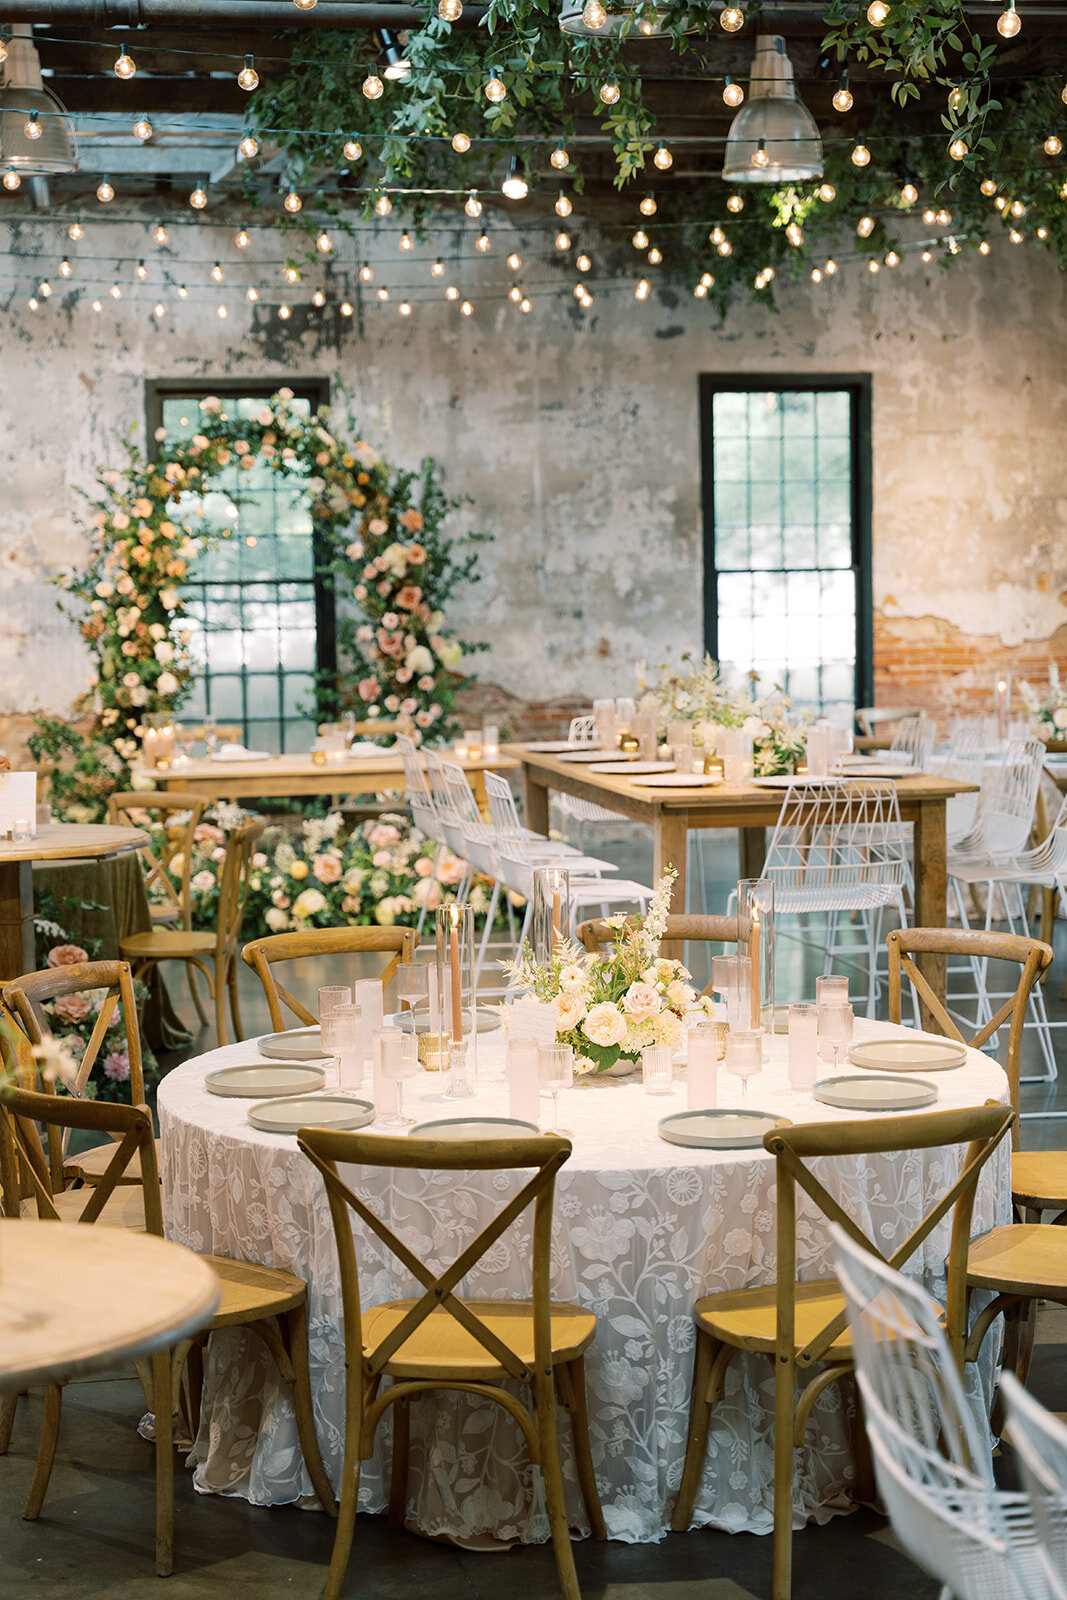 Reception set up at the Washington mill dye house with a mix of round and long guest tables and sweetheart table with a full floral arch backdrop.